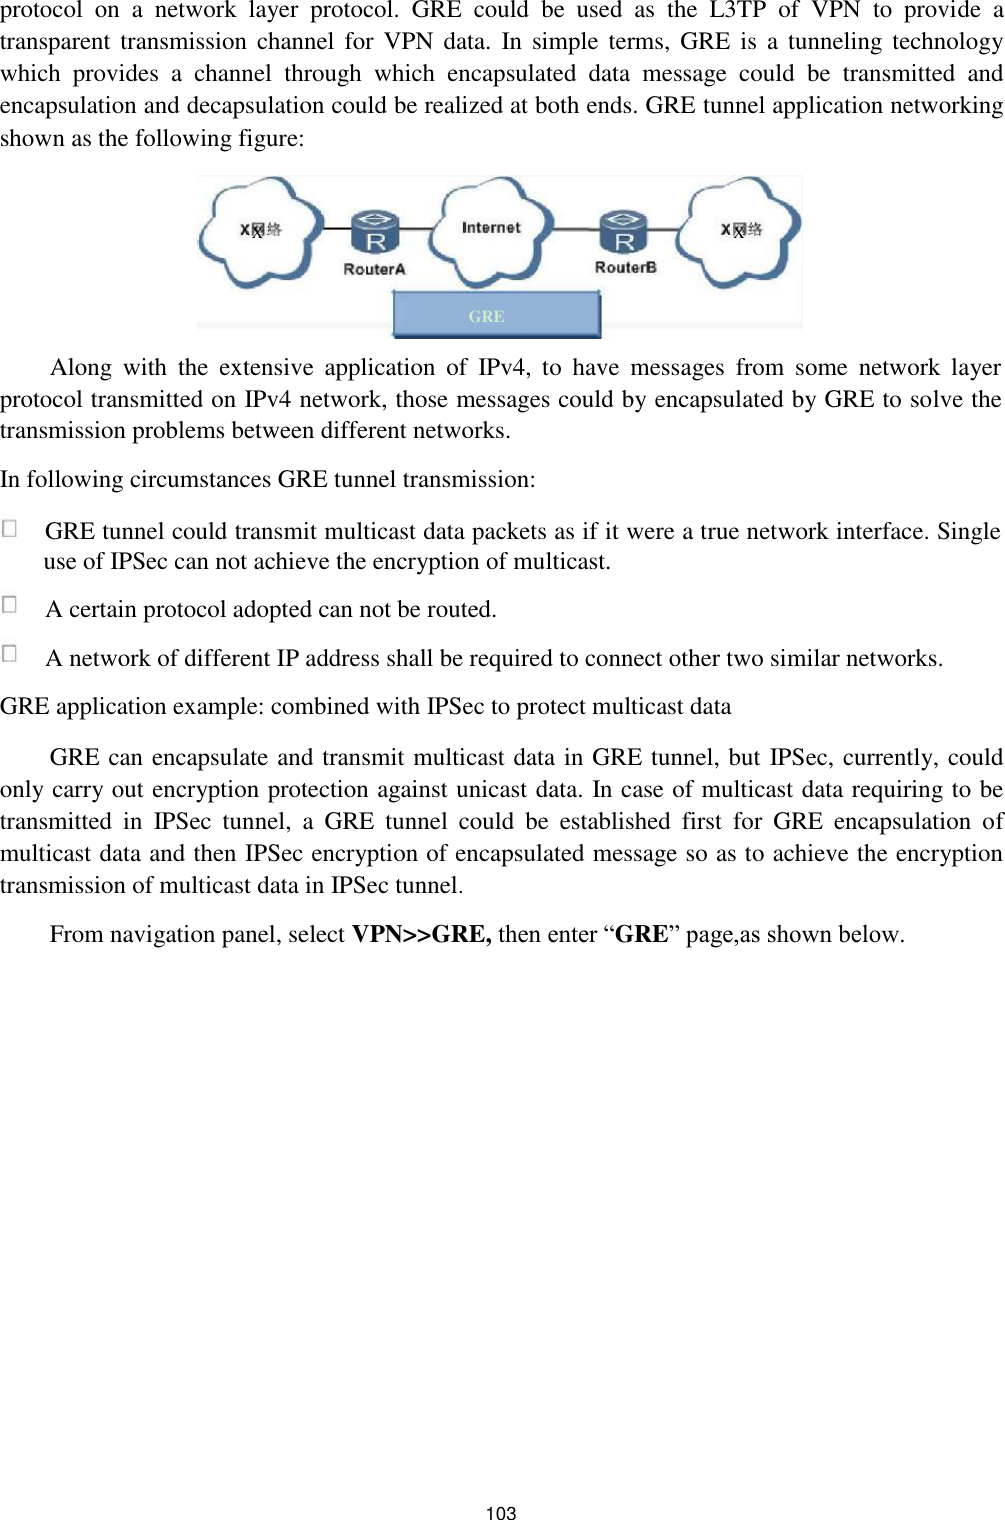 protocol  on  a  network  layer  protocol.  GRE  could  be  used  as  the  L3TP  of  VPN  to  provide  a transparent transmission  channel for VPN  data.  In  simple  terms,  GRE  is a tunneling technology which  provides  a  channel  through  which  encapsulated  data  message  could  be  transmitted  and encapsulation and decapsulation could be realized at both ends. GRE tunnel application networking shown as the following figure:   X  X      GRE  Along  with  the  extensive  application  of  IPv4,  to  have  messages  from  some  network  layer protocol transmitted on IPv4 network, those messages could by encapsulated by GRE to solve the transmission problems between different networks.  In following circumstances GRE tunnel transmission:   GRE tunnel could transmit multicast data packets as if it were a true network interface. Single use of IPSec can not achieve the encryption of multicast.   A certain protocol adopted can not be routed.   A network of different IP address shall be required to connect other two similar networks.  GRE application example: combined with IPSec to protect multicast data  GRE can encapsulate and transmit multicast data in GRE tunnel, but IPSec, currently, could only carry out encryption protection against unicast data. In case of multicast data requiring to be transmitted  in  IPSec  tunnel,  a  GRE  tunnel  could  be  established  first  for  GRE  encapsulation  of multicast data and then IPSec encryption of encapsulated message so as to achieve the encryption transmission of multicast data in IPSec tunnel.  From navigation panel, select VPN&gt;&gt;GRE, then enter “GRE” page,as shown below.                           103 